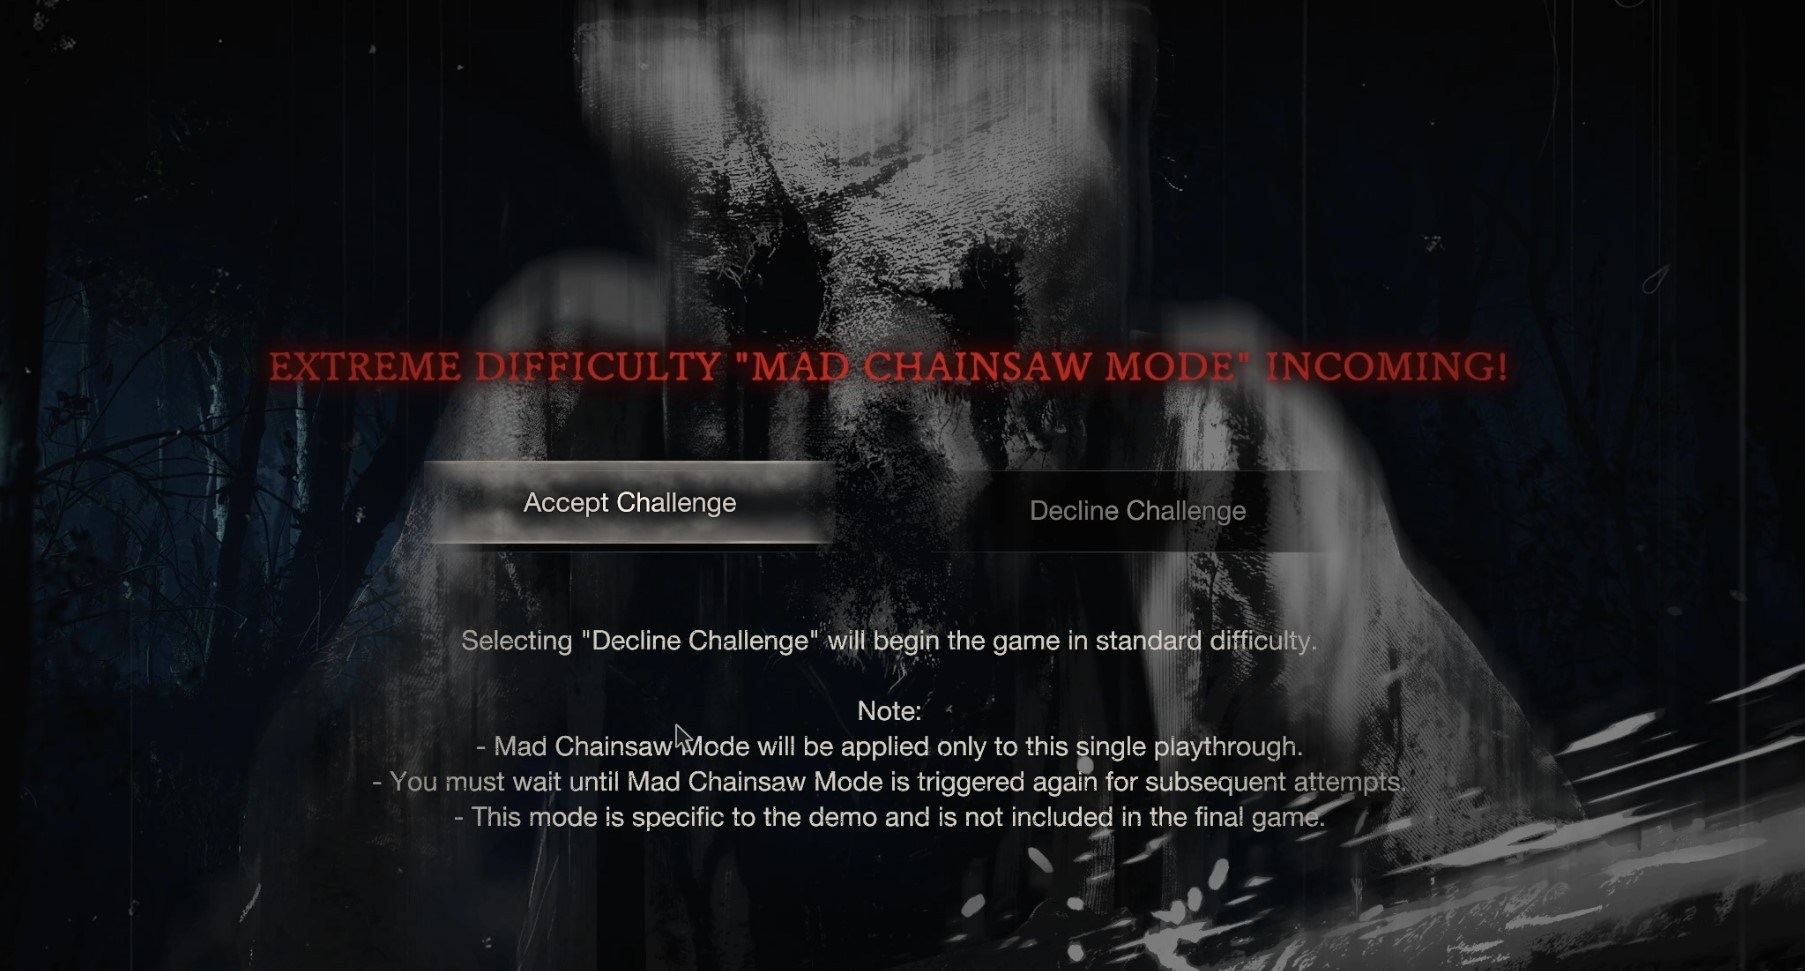 Mad Chainsaw mode menu screen describing its intense challenge, run-limited nature, and that it will not be in the final game